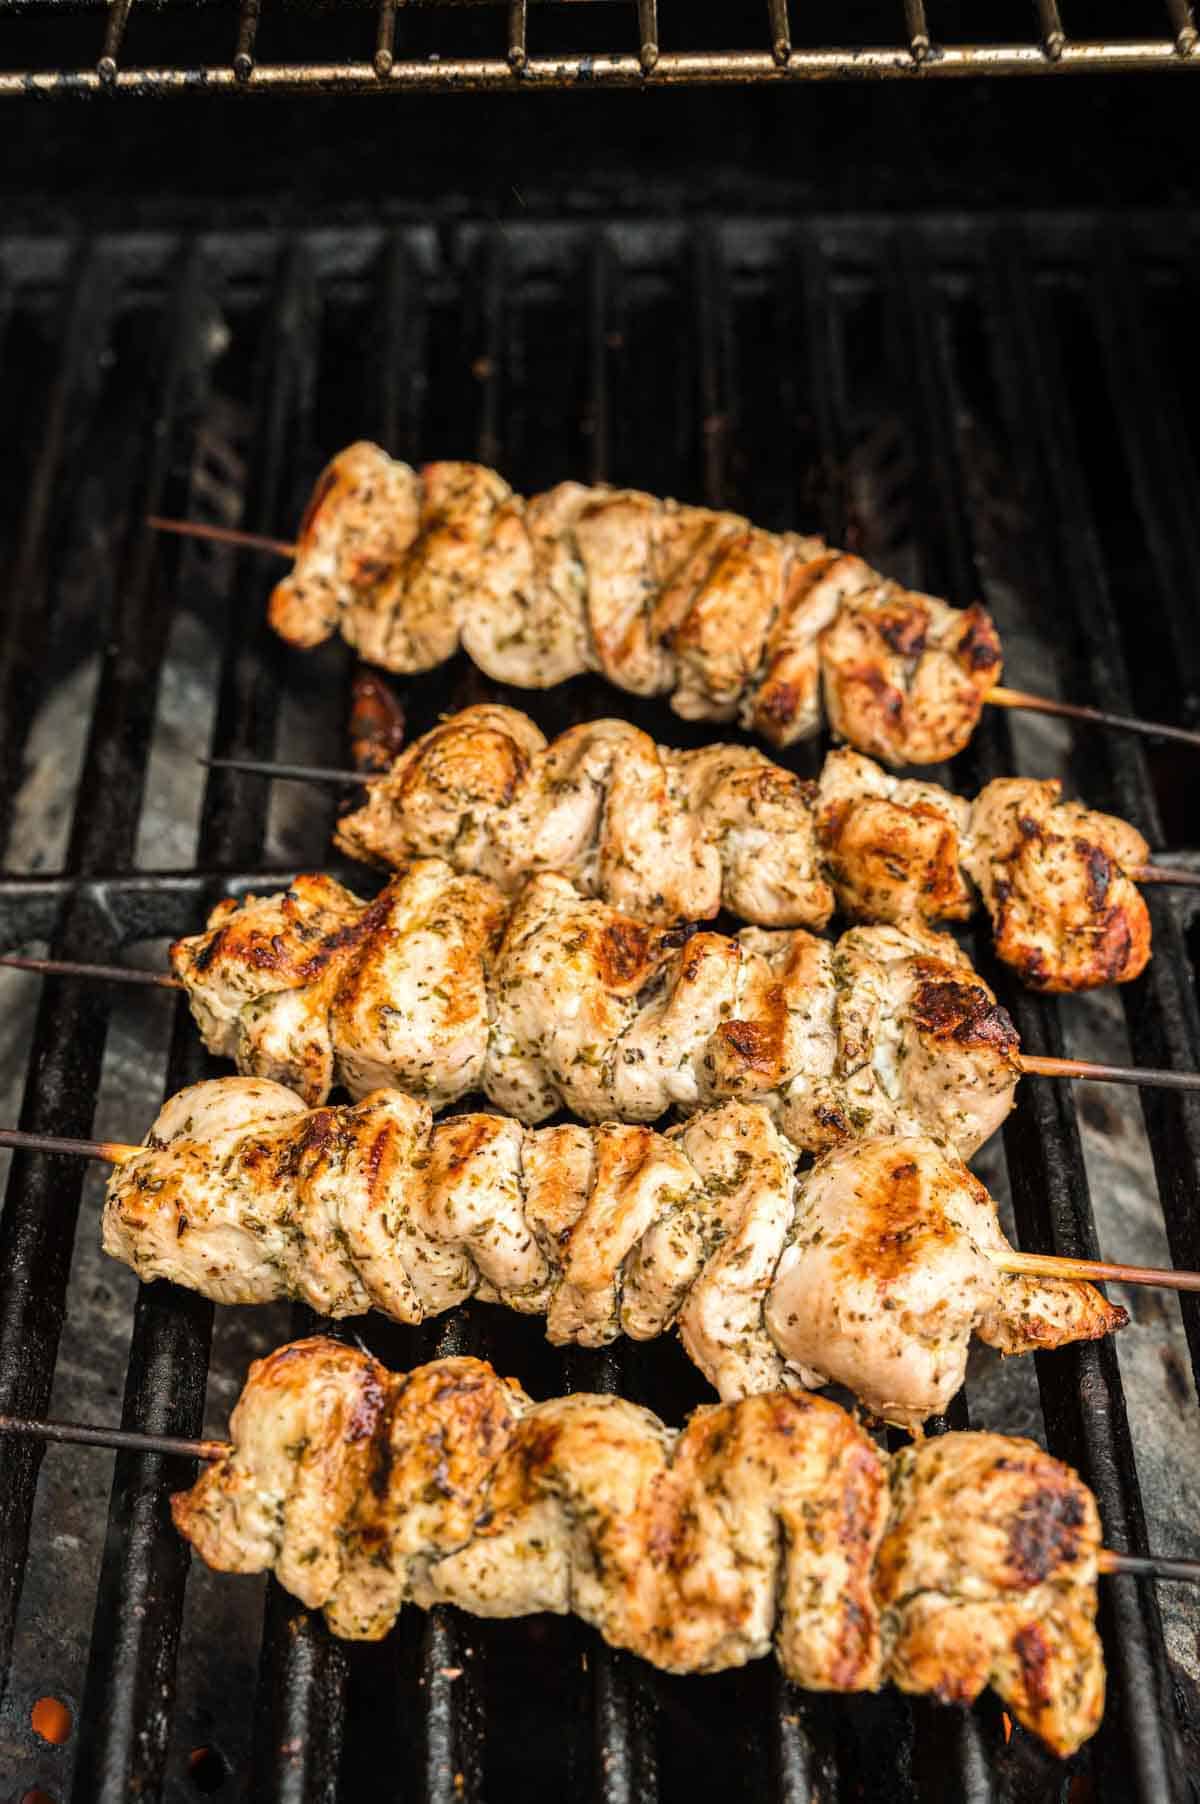 Five Finished Servings of Chicken Souvlaki on a Grill